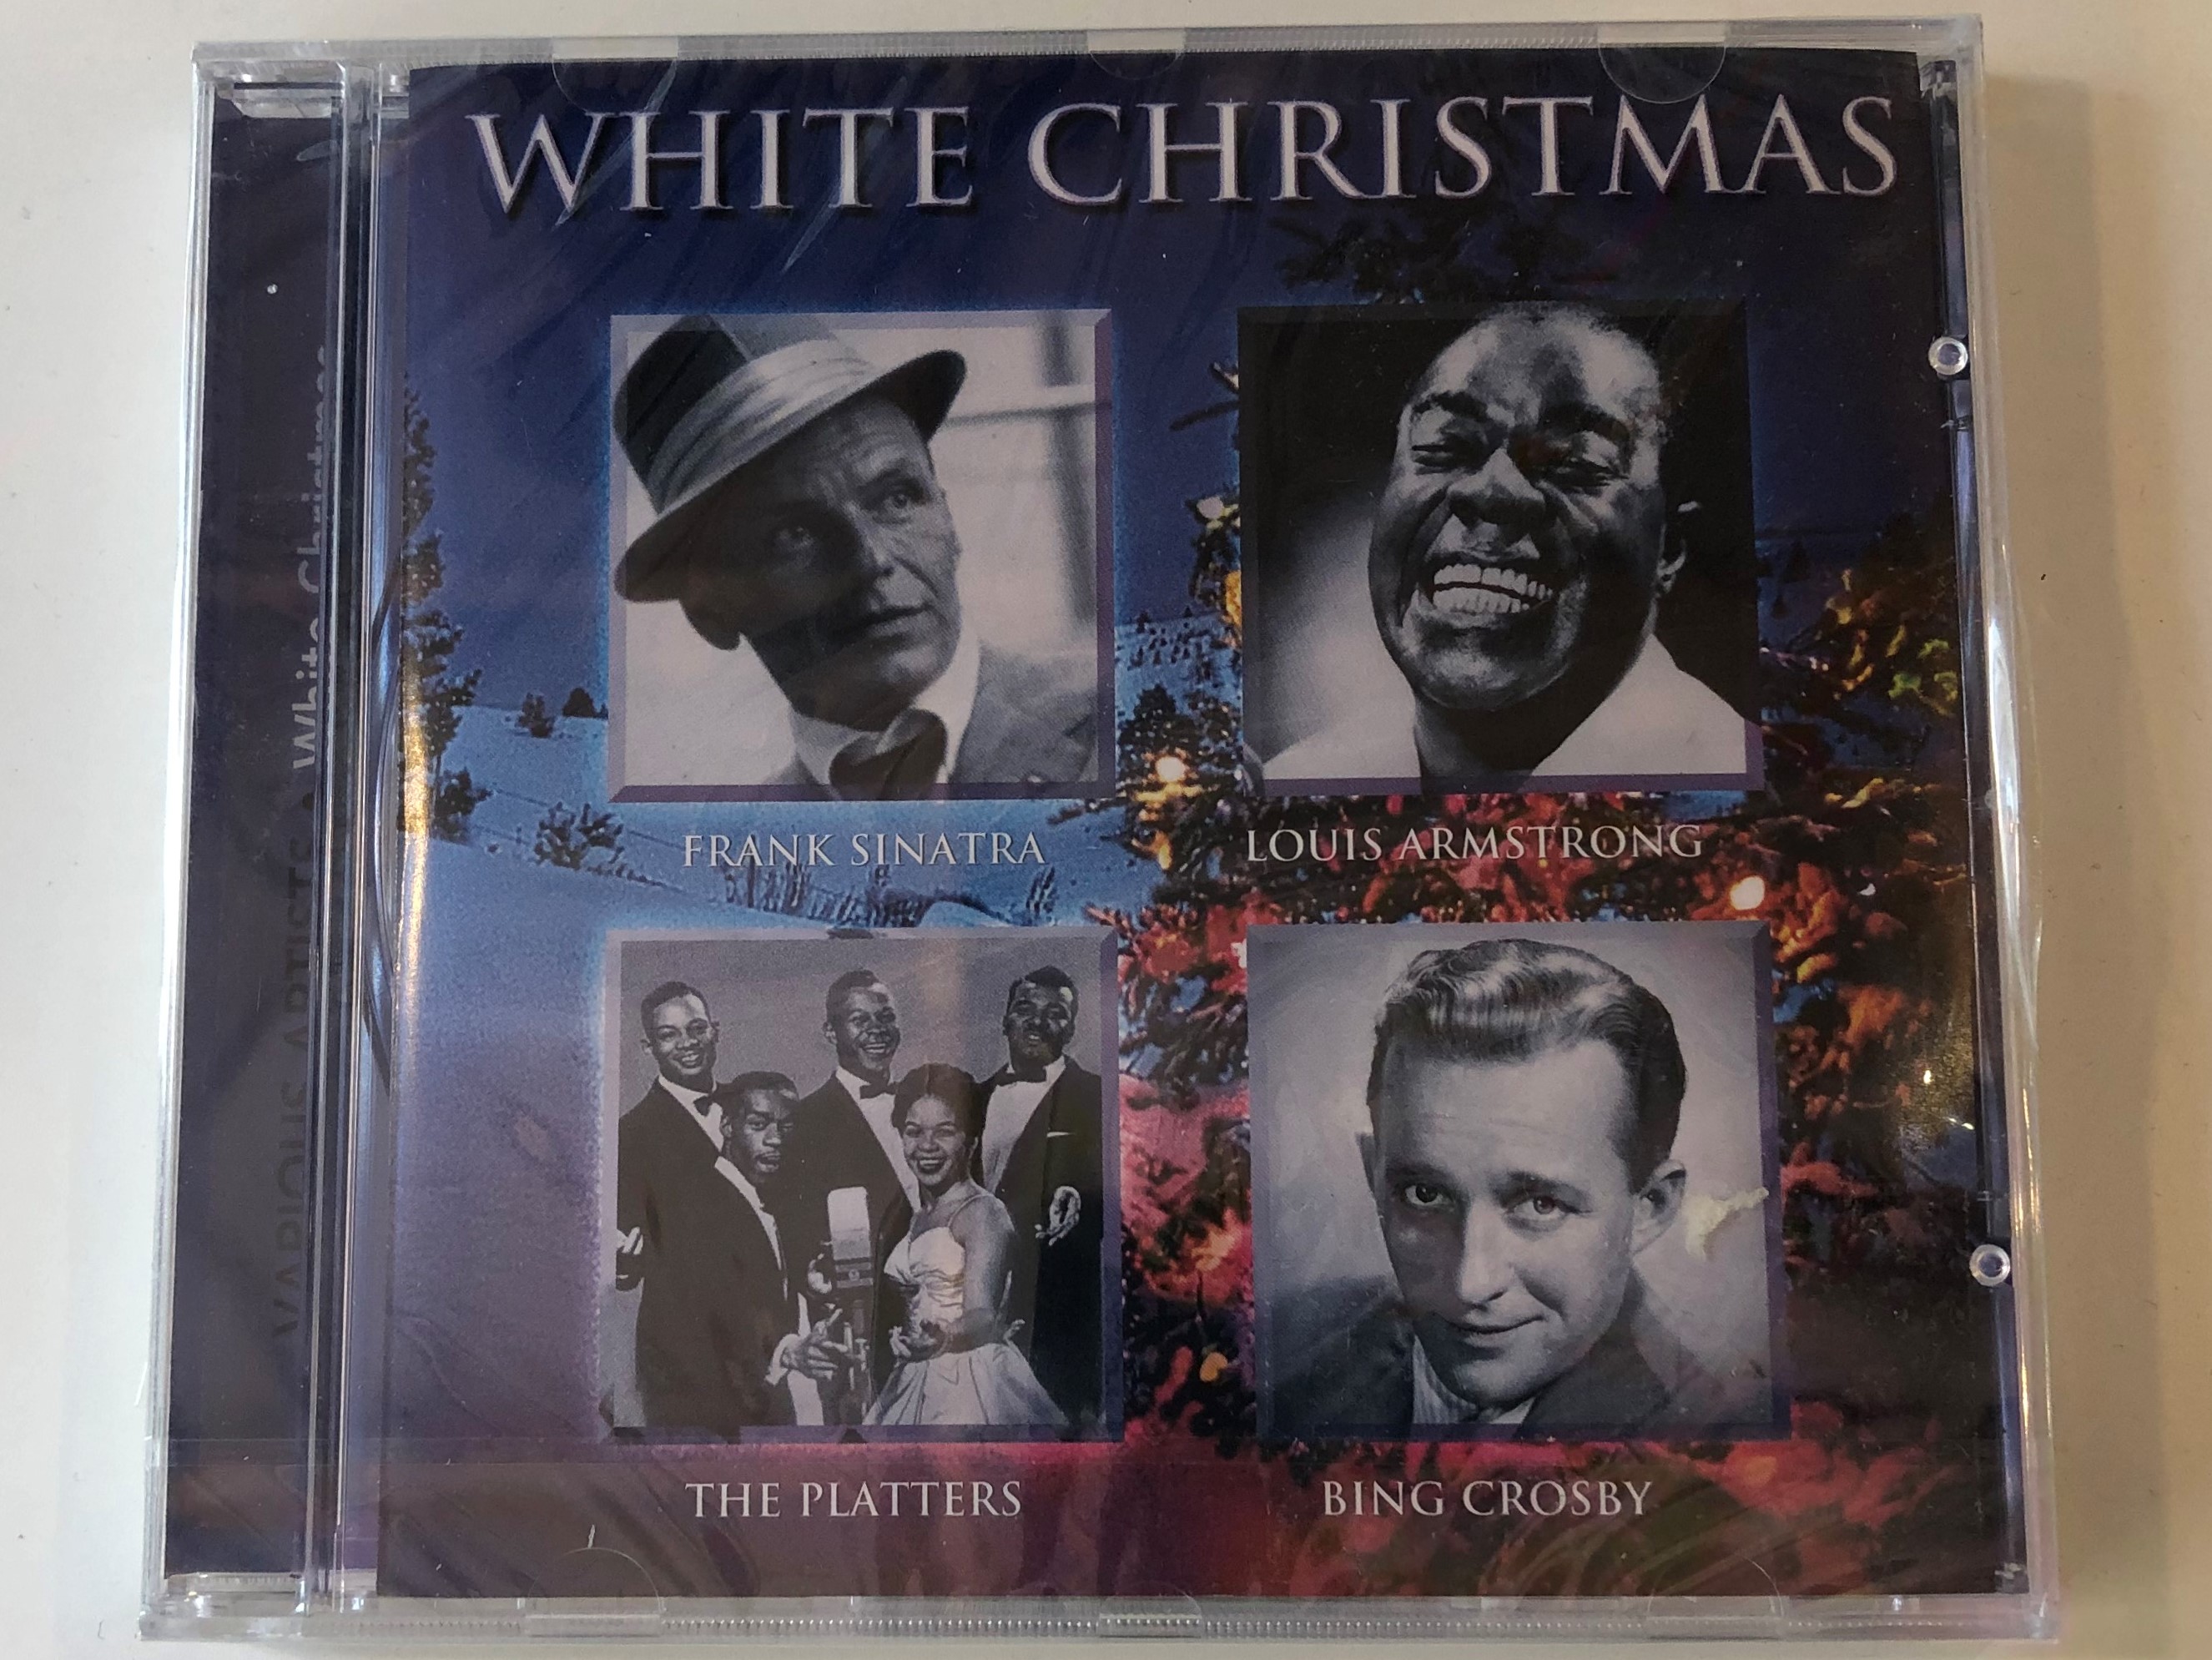 white-christmas-frank-sinatra-louis-armstrong-the-platters-bing-crosby-bellevue-entertainment-audio-cd-2000-12043-2-1-.jpg